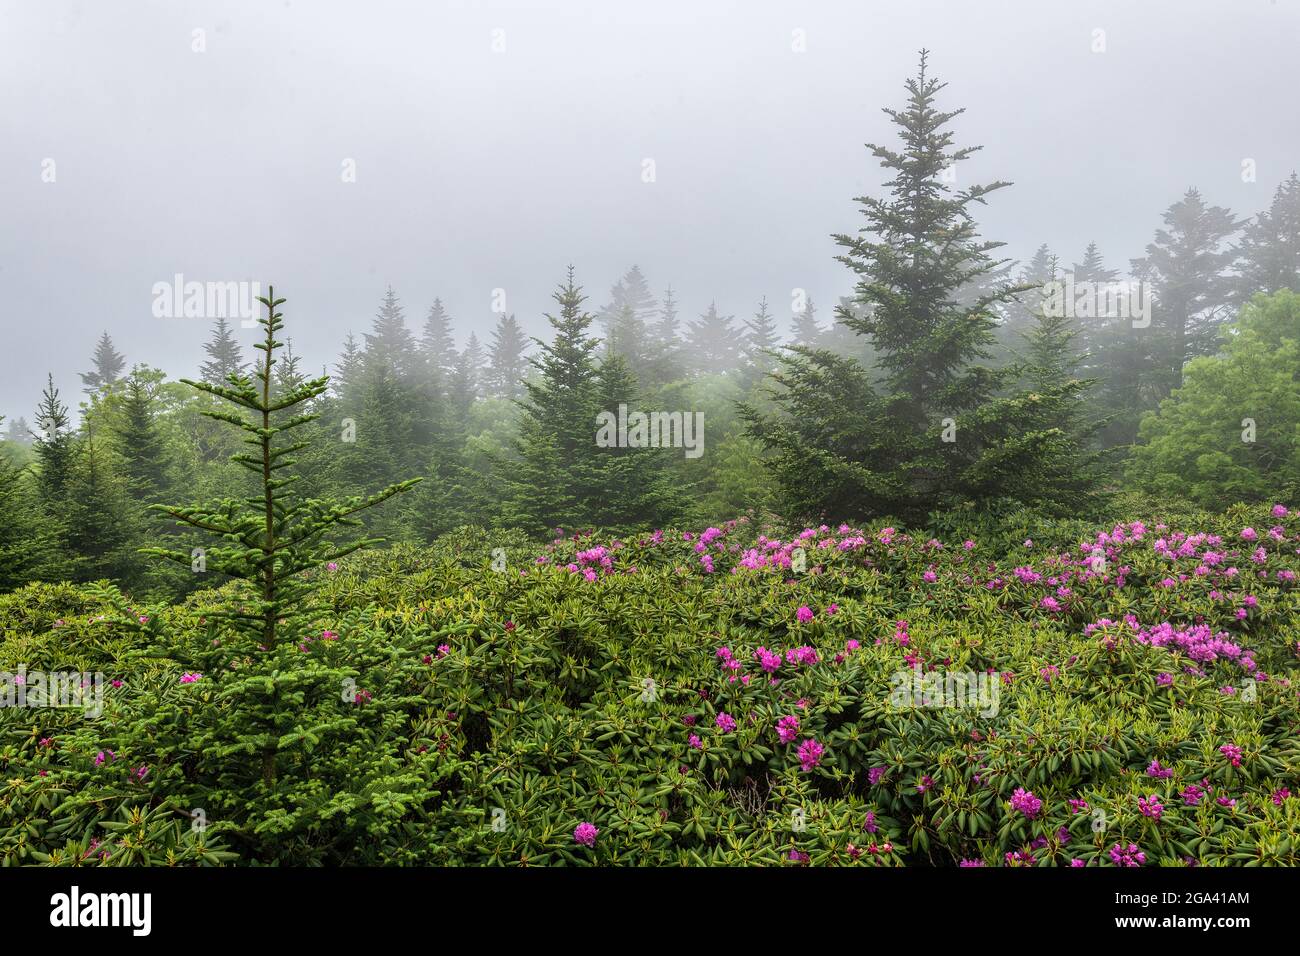 Rhodendron bushes in bloom growing over fence, Cloudland Trail, North Carolina Stock Photo